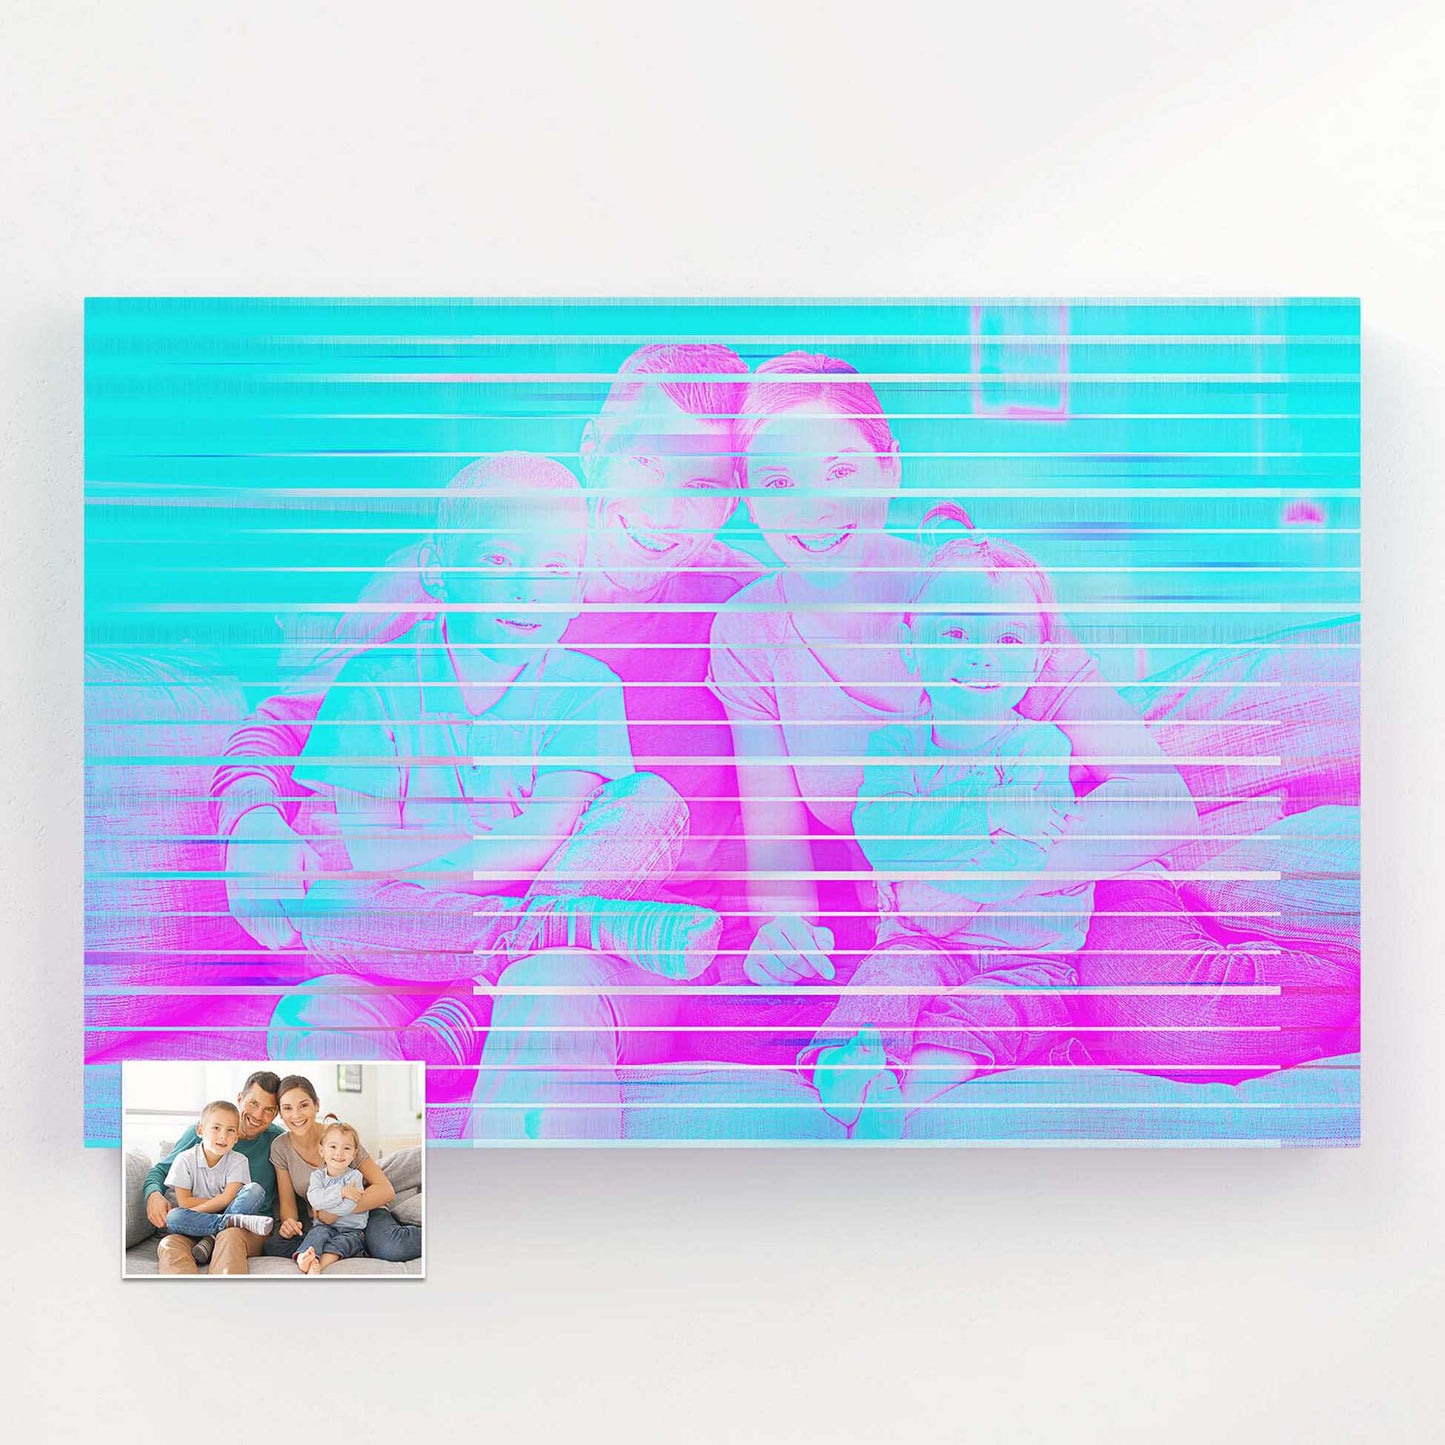 Turn your cherished memories into a stunning work of art with our Personalised Purple & Blue Canvas. The texture and effect applied to the canvas create a unique and mesmerizing visual experience. Each piece is original and elegant